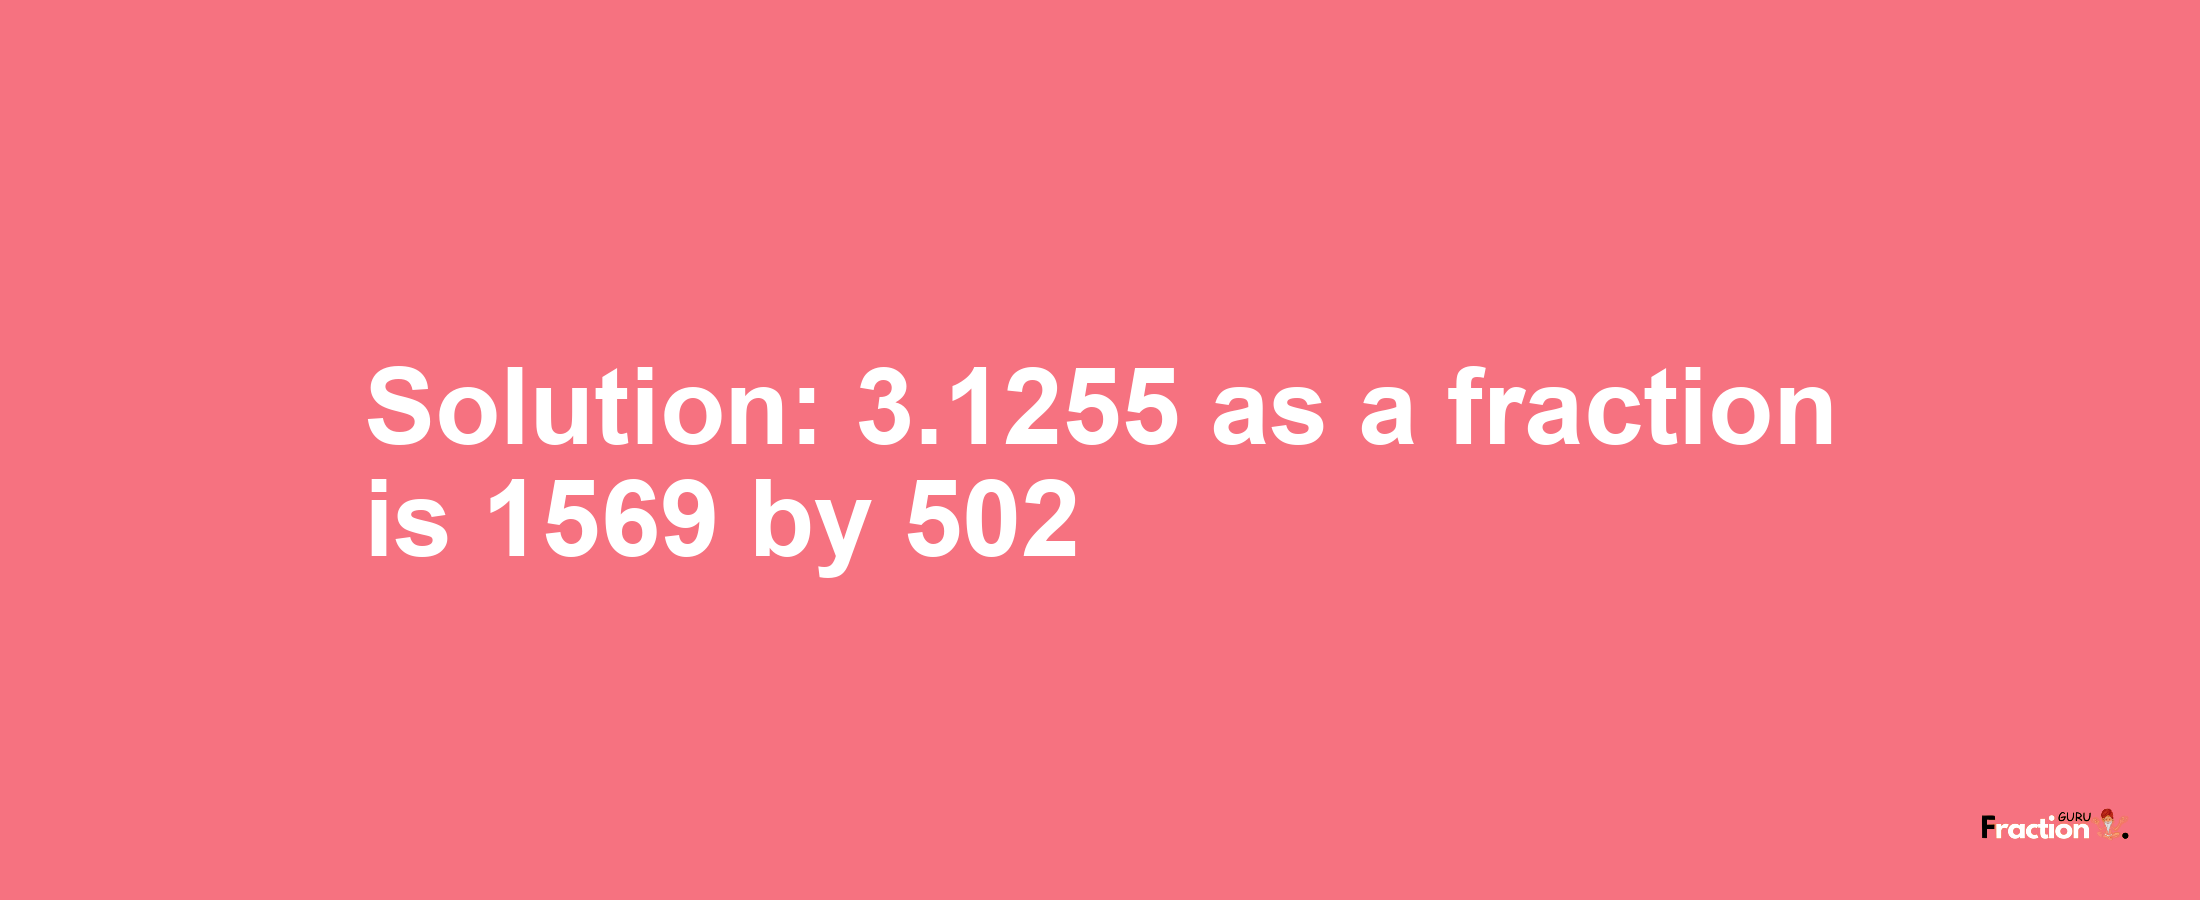 Solution:3.1255 as a fraction is 1569/502